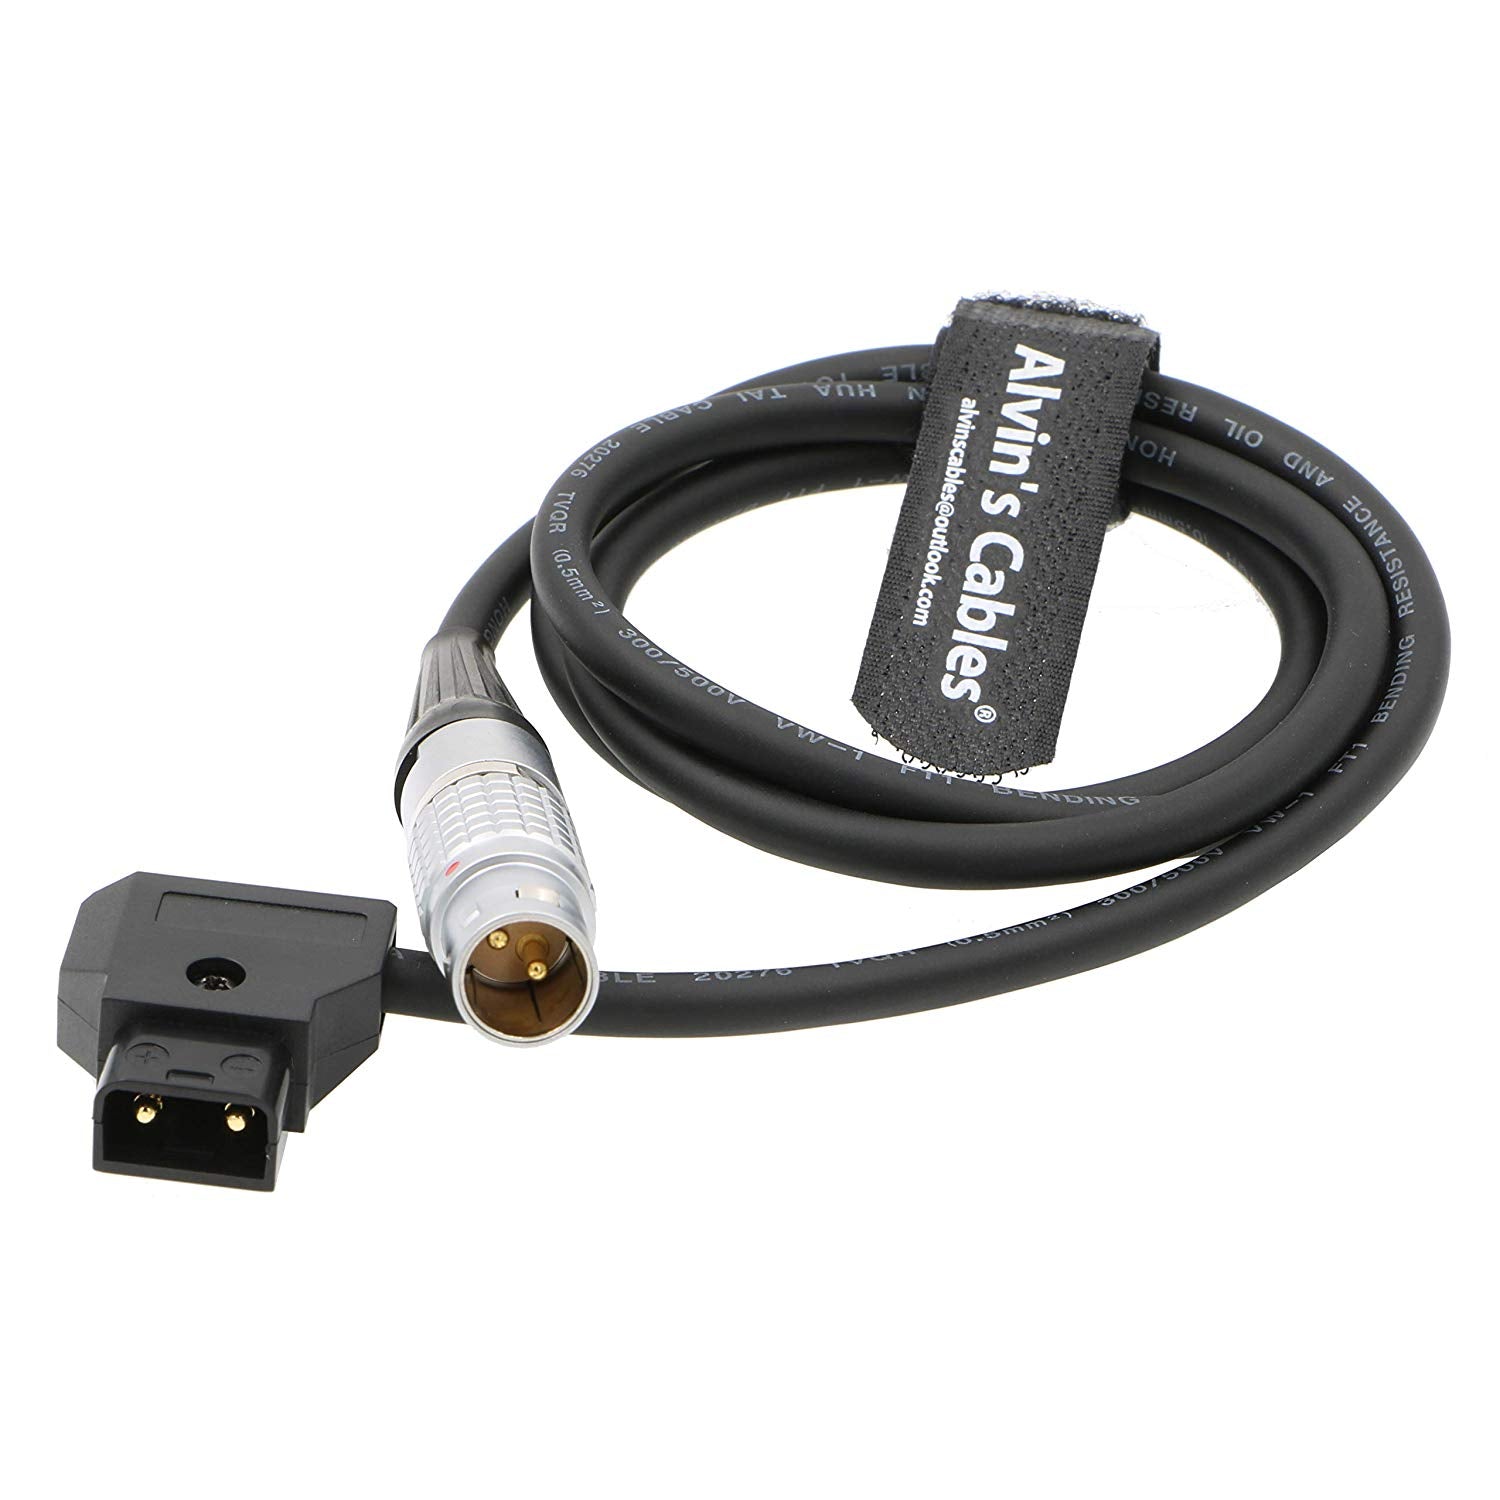 Alvin’s Cables MOVI PRO Power Adapter Cable 2 Pin Male to D-tap